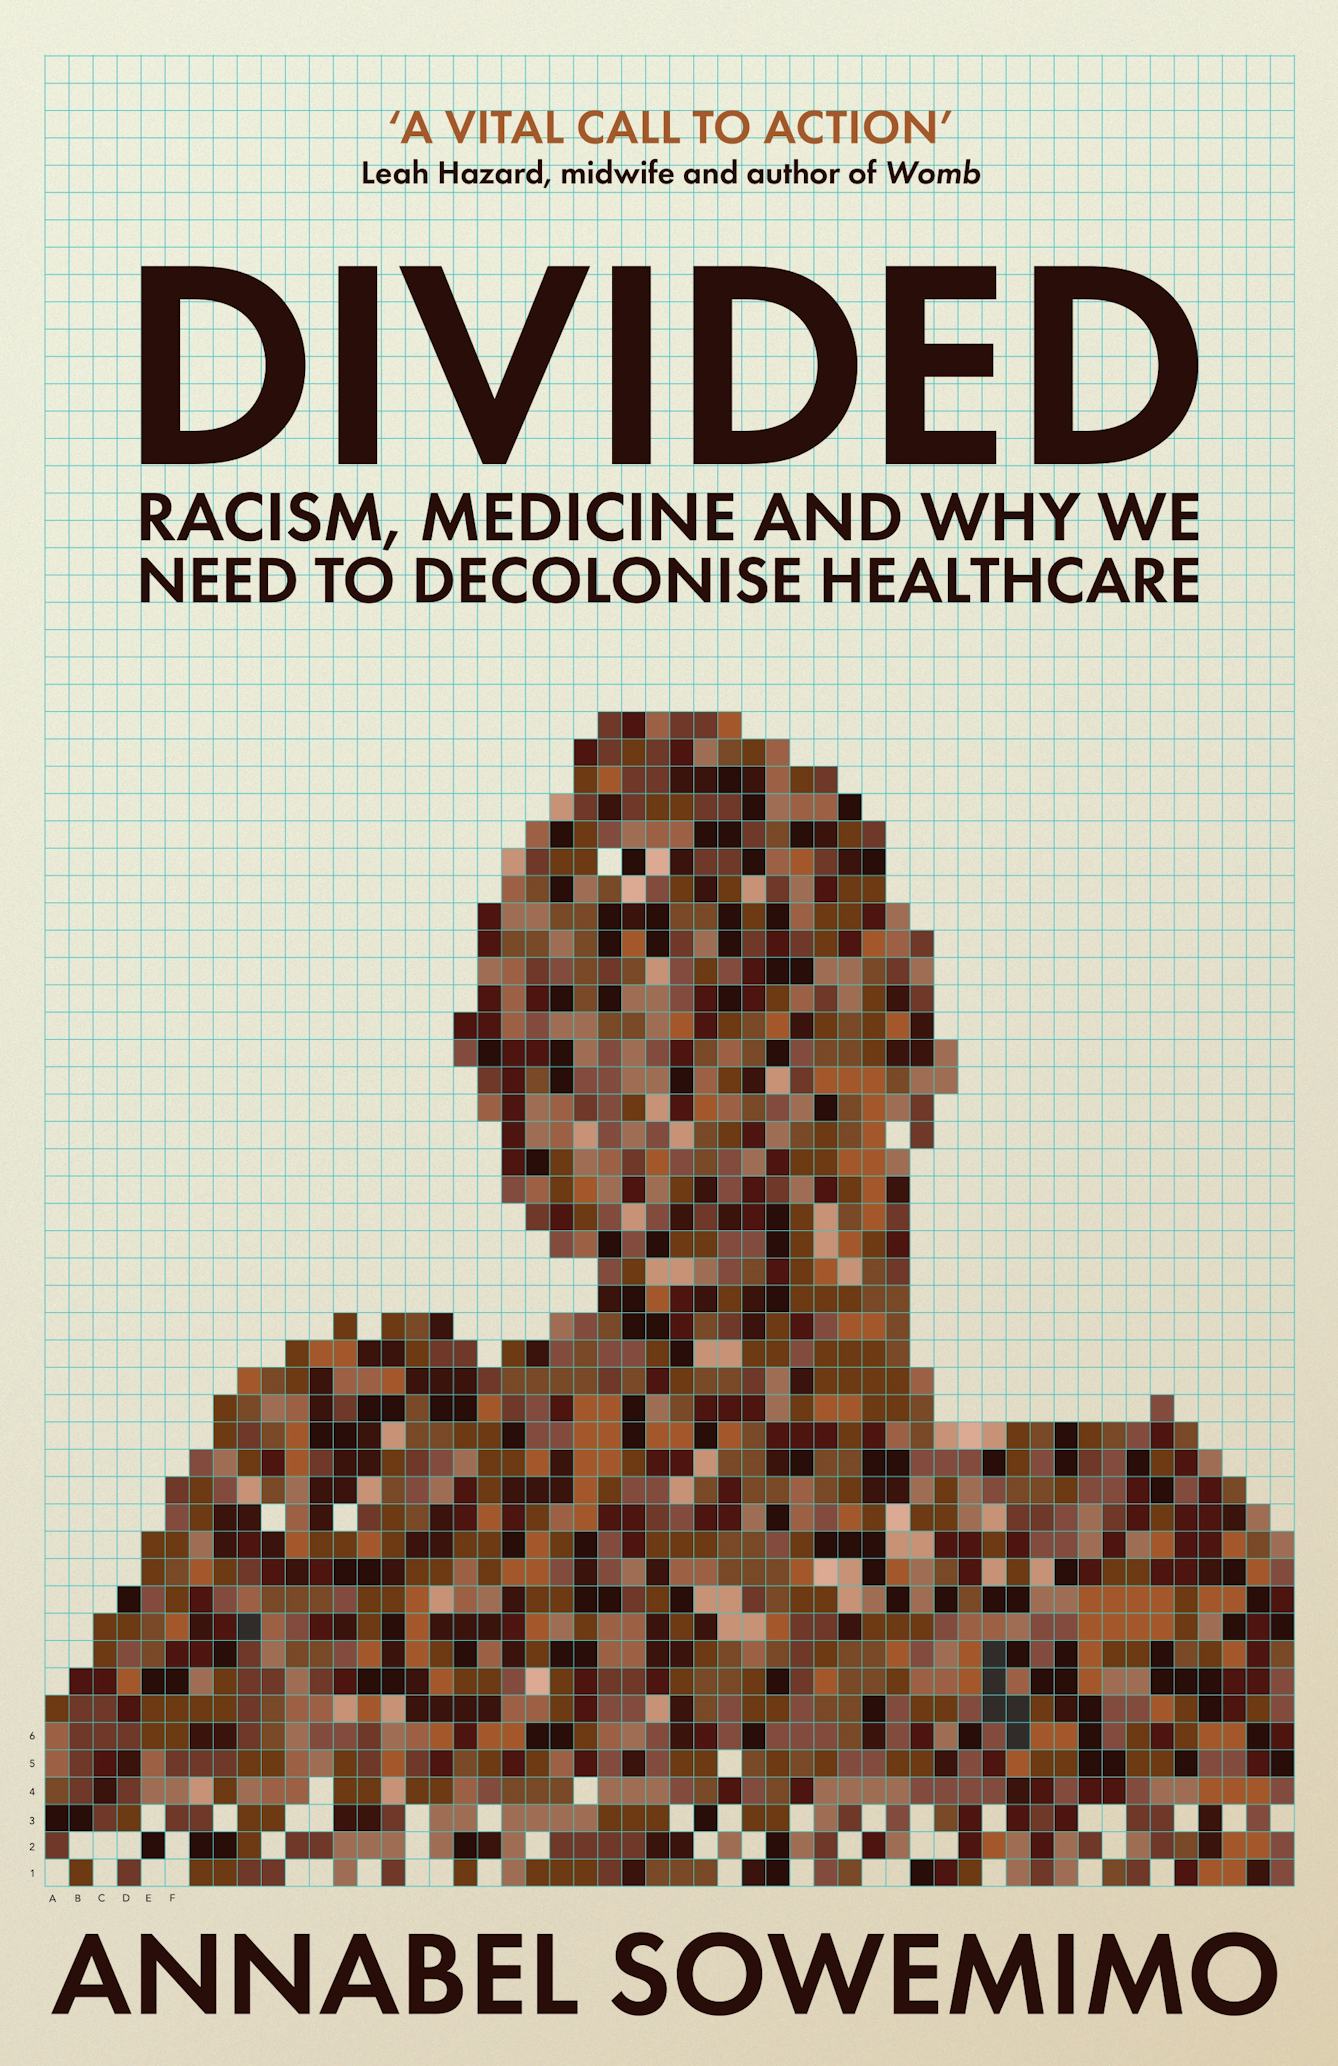 The front cover of the book 'Divided' by Annabel Sowemimo